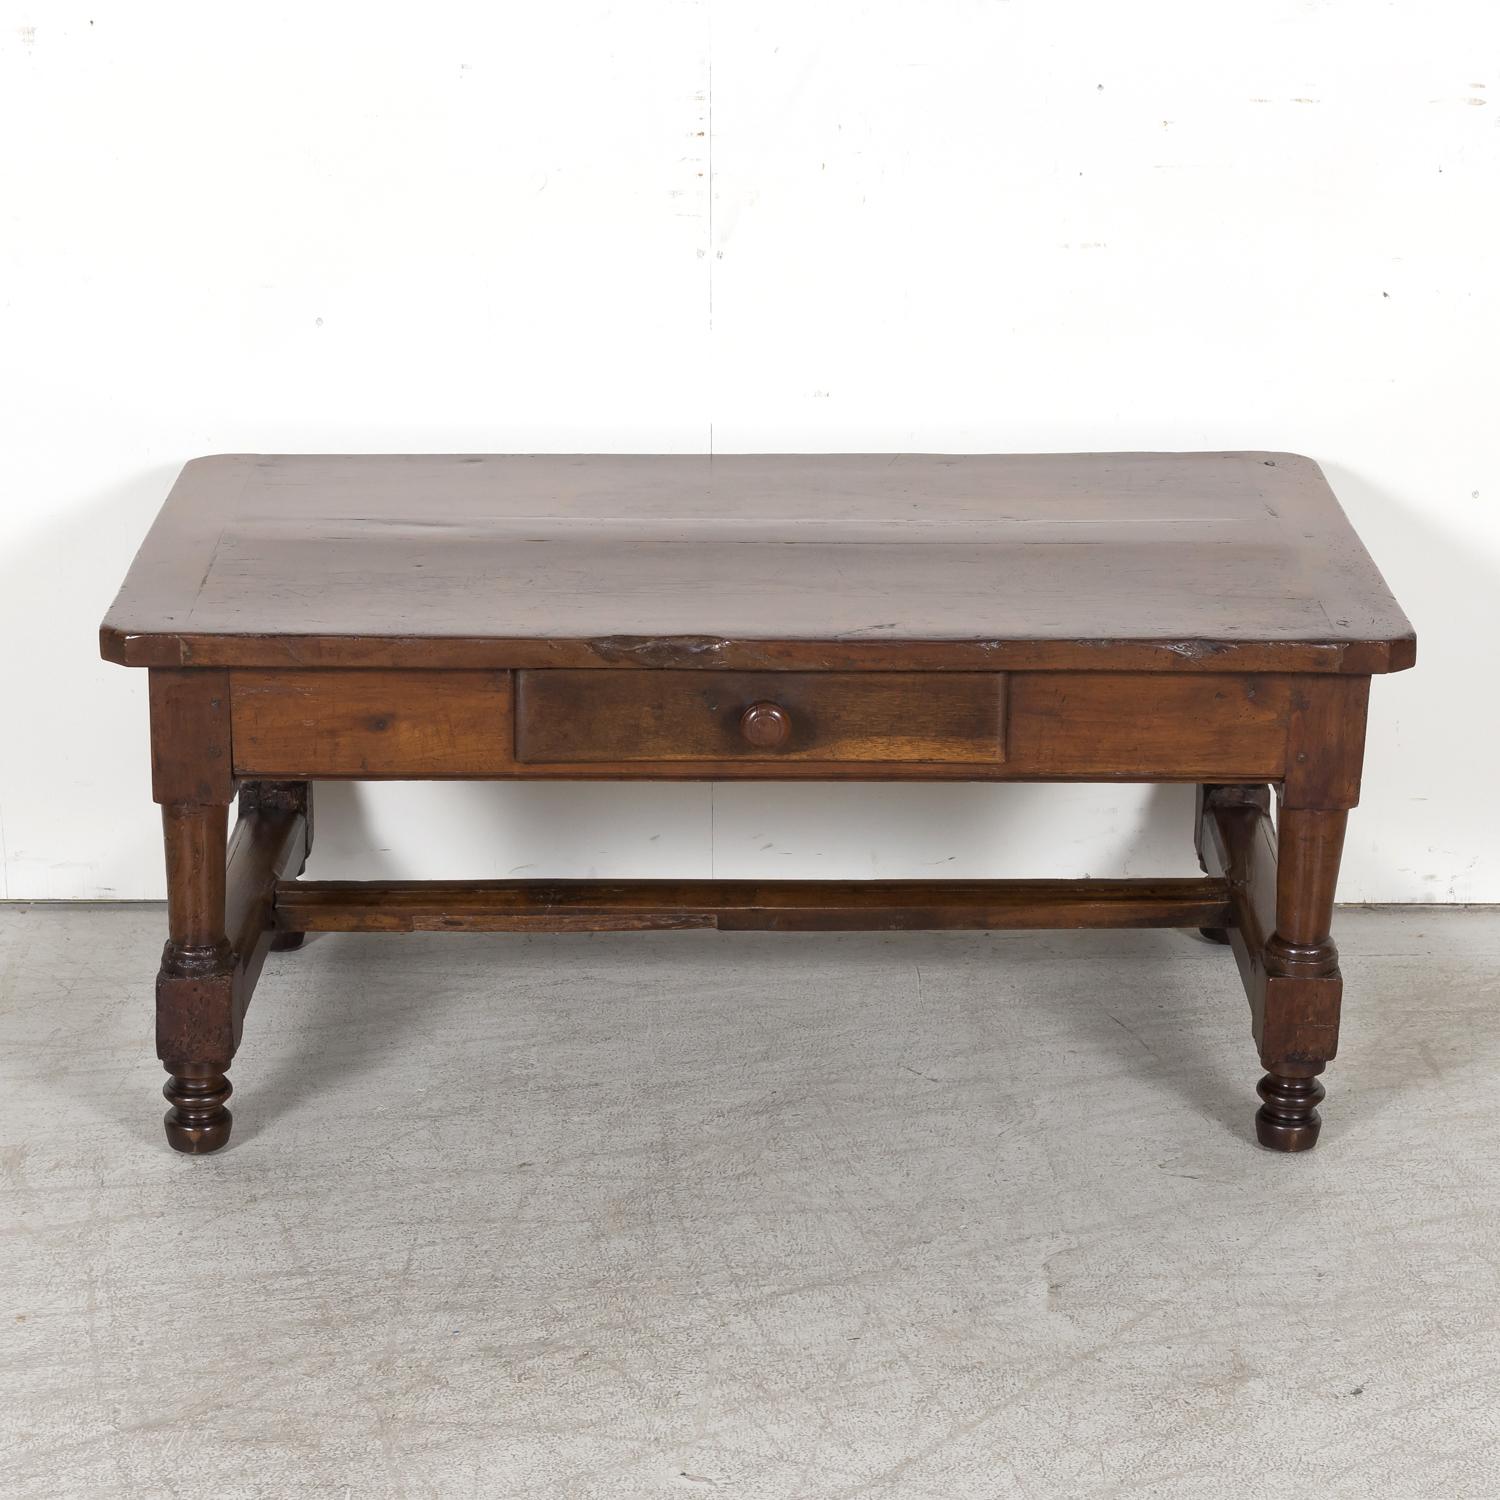 An 18th century French Country coffee table handcrafted of solid walnut in Lyon, circa 1760s, having an inset rectangular plank top with canted corners above a single center drawer with original wood knob. Raised on circular tapered legs legs ending